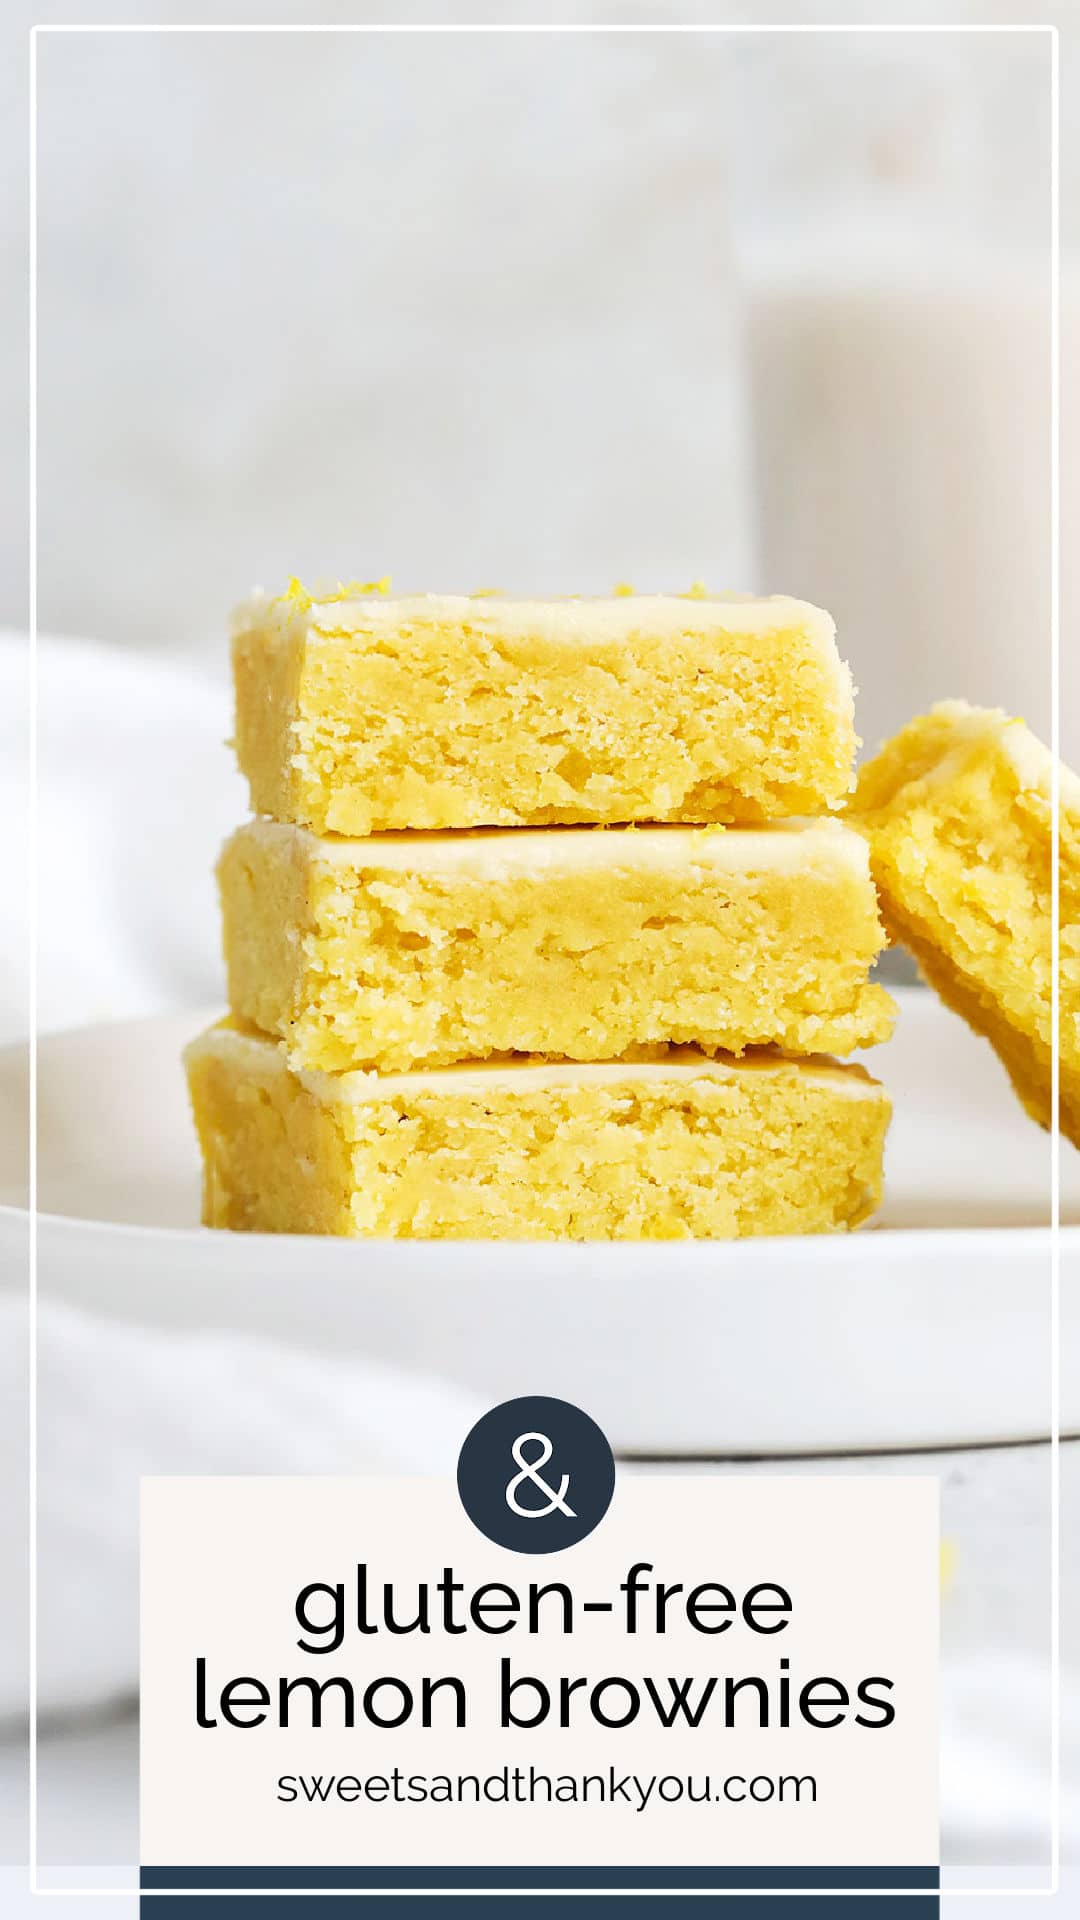 Gluten-Free Lemon Brownies - These fudgy lemon brownies are full of zesty citrus flavor. They're like taking a bite out of sunshine! // gluten free lemon brownie recipe // the best lemon brownies // easy lemon brownies // fudgy lemon brownie recipe // iced lemon brownies // lemon icing // lemon blondies // gluten-free lemon blondies // gluten-free lemon desserts // gluten-free Easter desserts // lemon dessert recipe // gluten-free spring dessert // gluten-free brownies